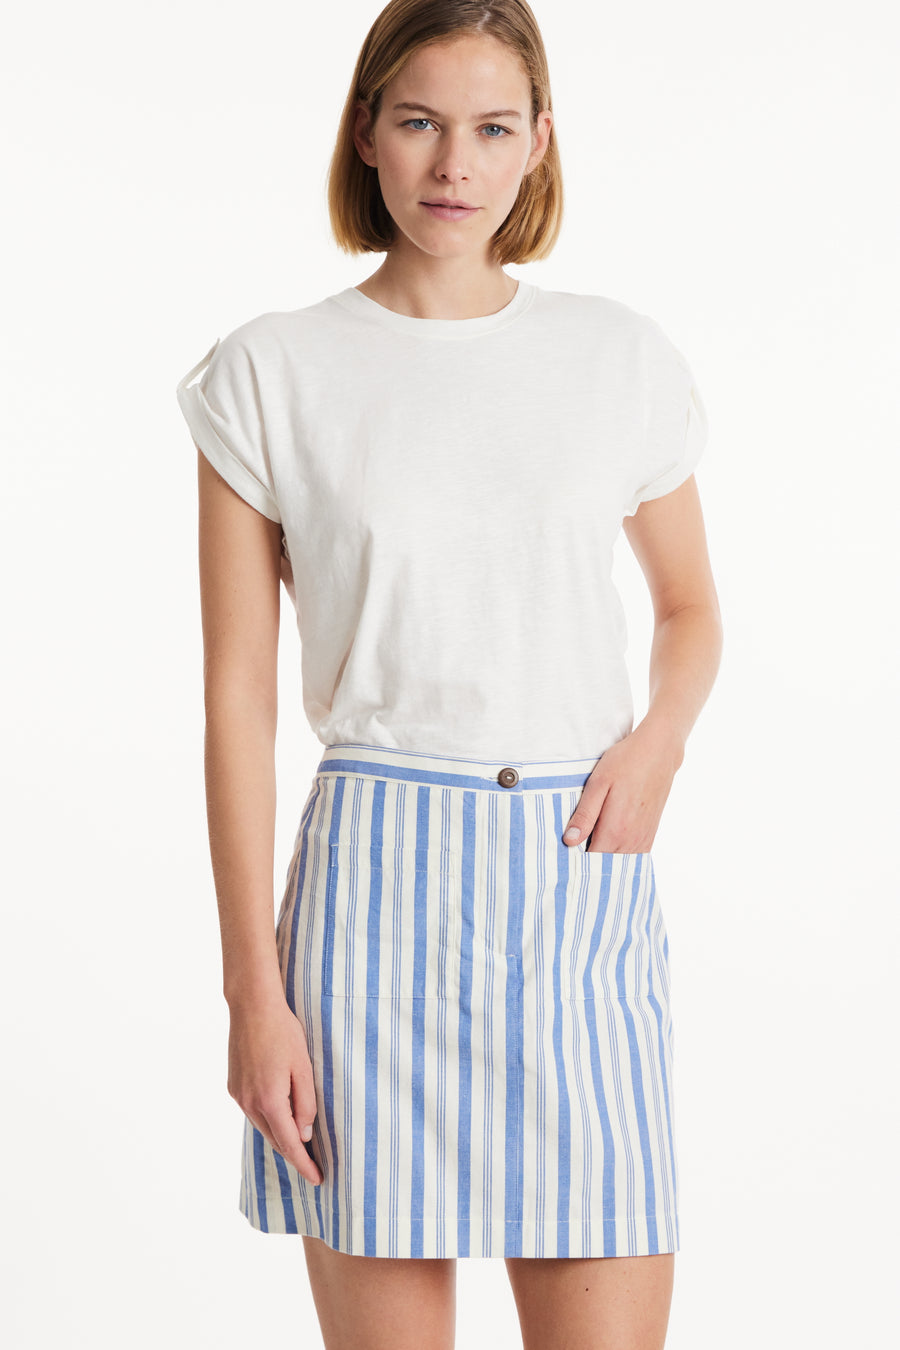 People Tree Fair Trade, Ethical & Sustainable Tica Striped Skirt in Blue stripe 100% Organic Cotton